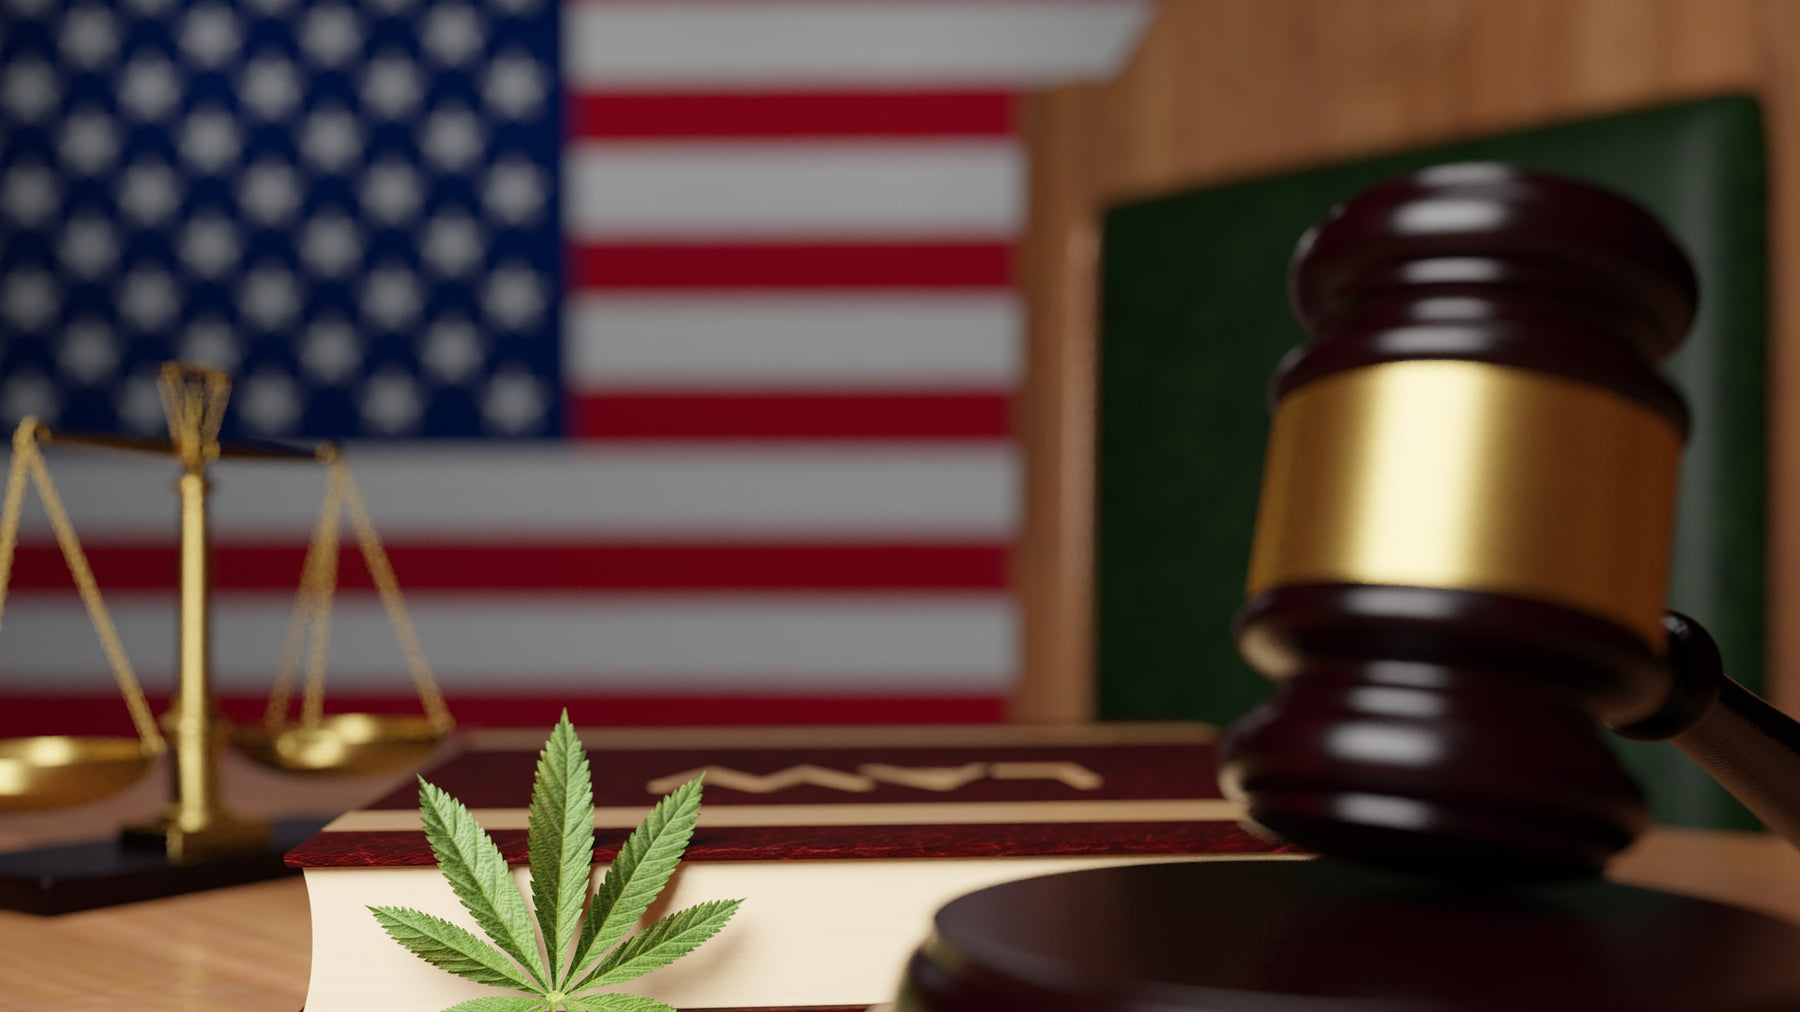 WHICH STATES MIGHT LEGALIZE NEXT?